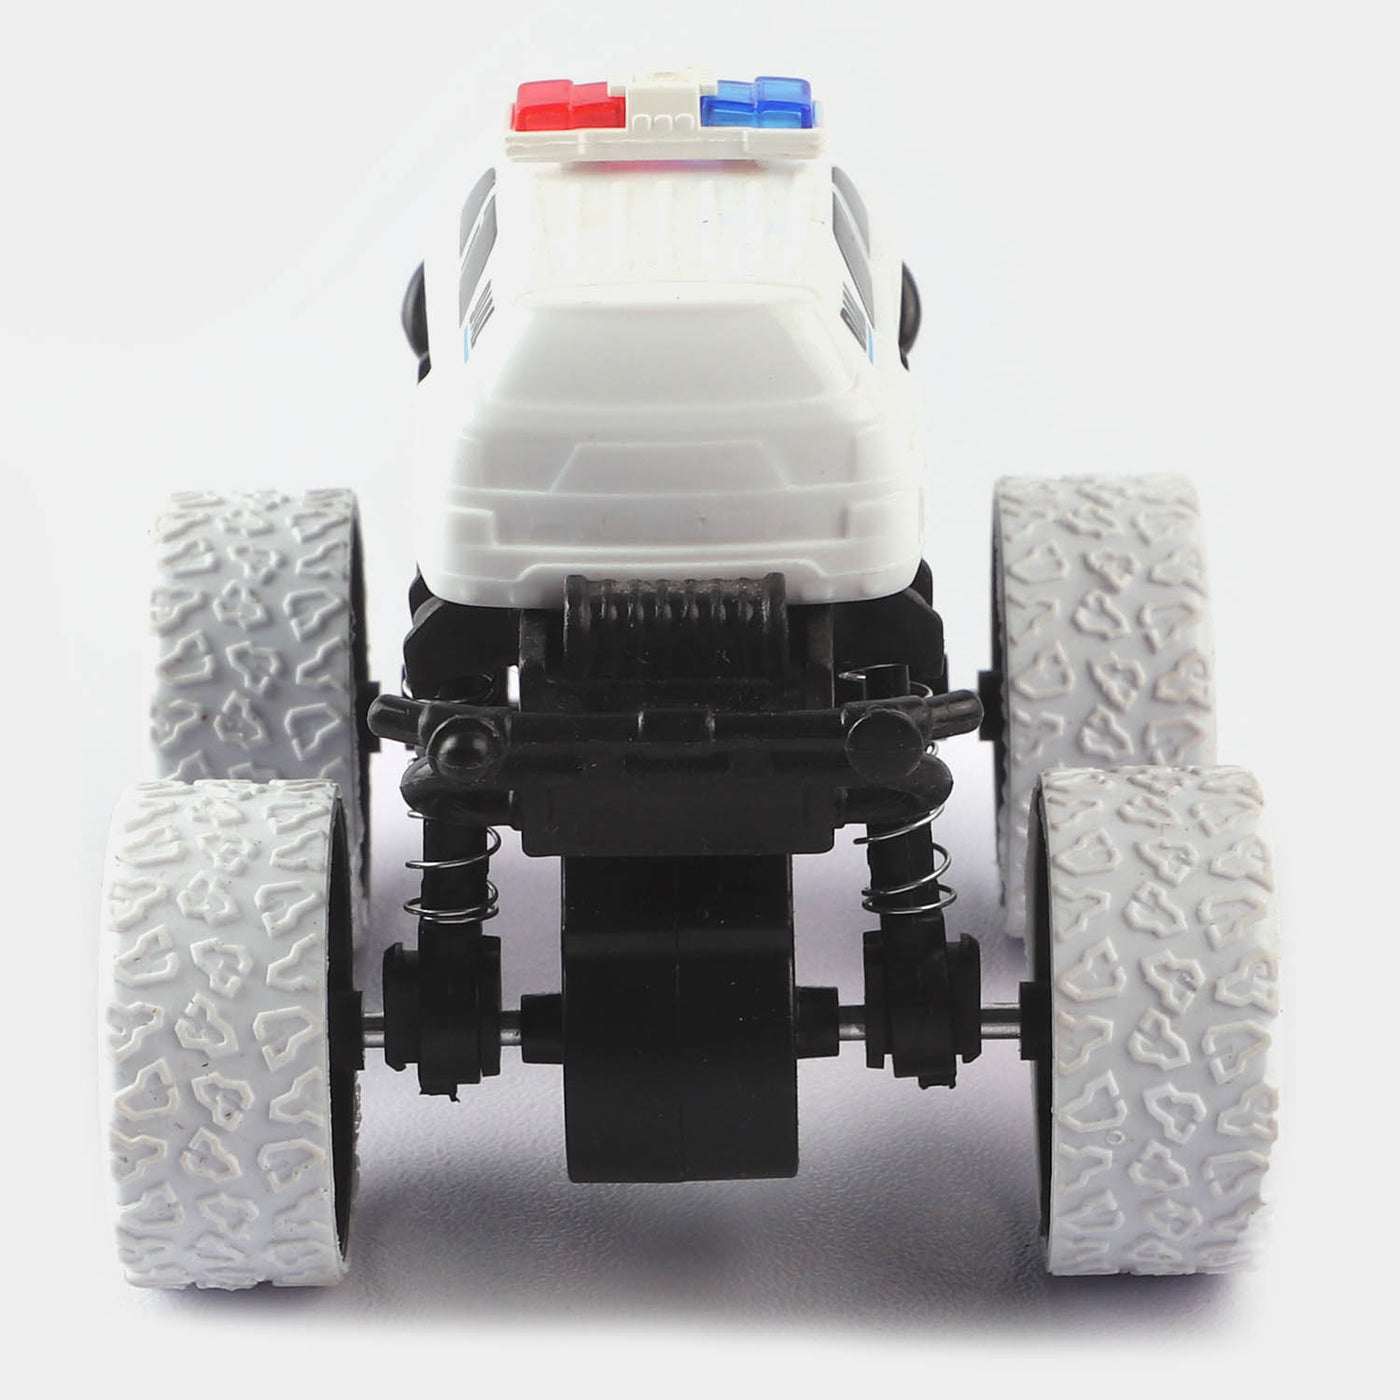 Friction Mini Police Model Vehicle Toy For Kids